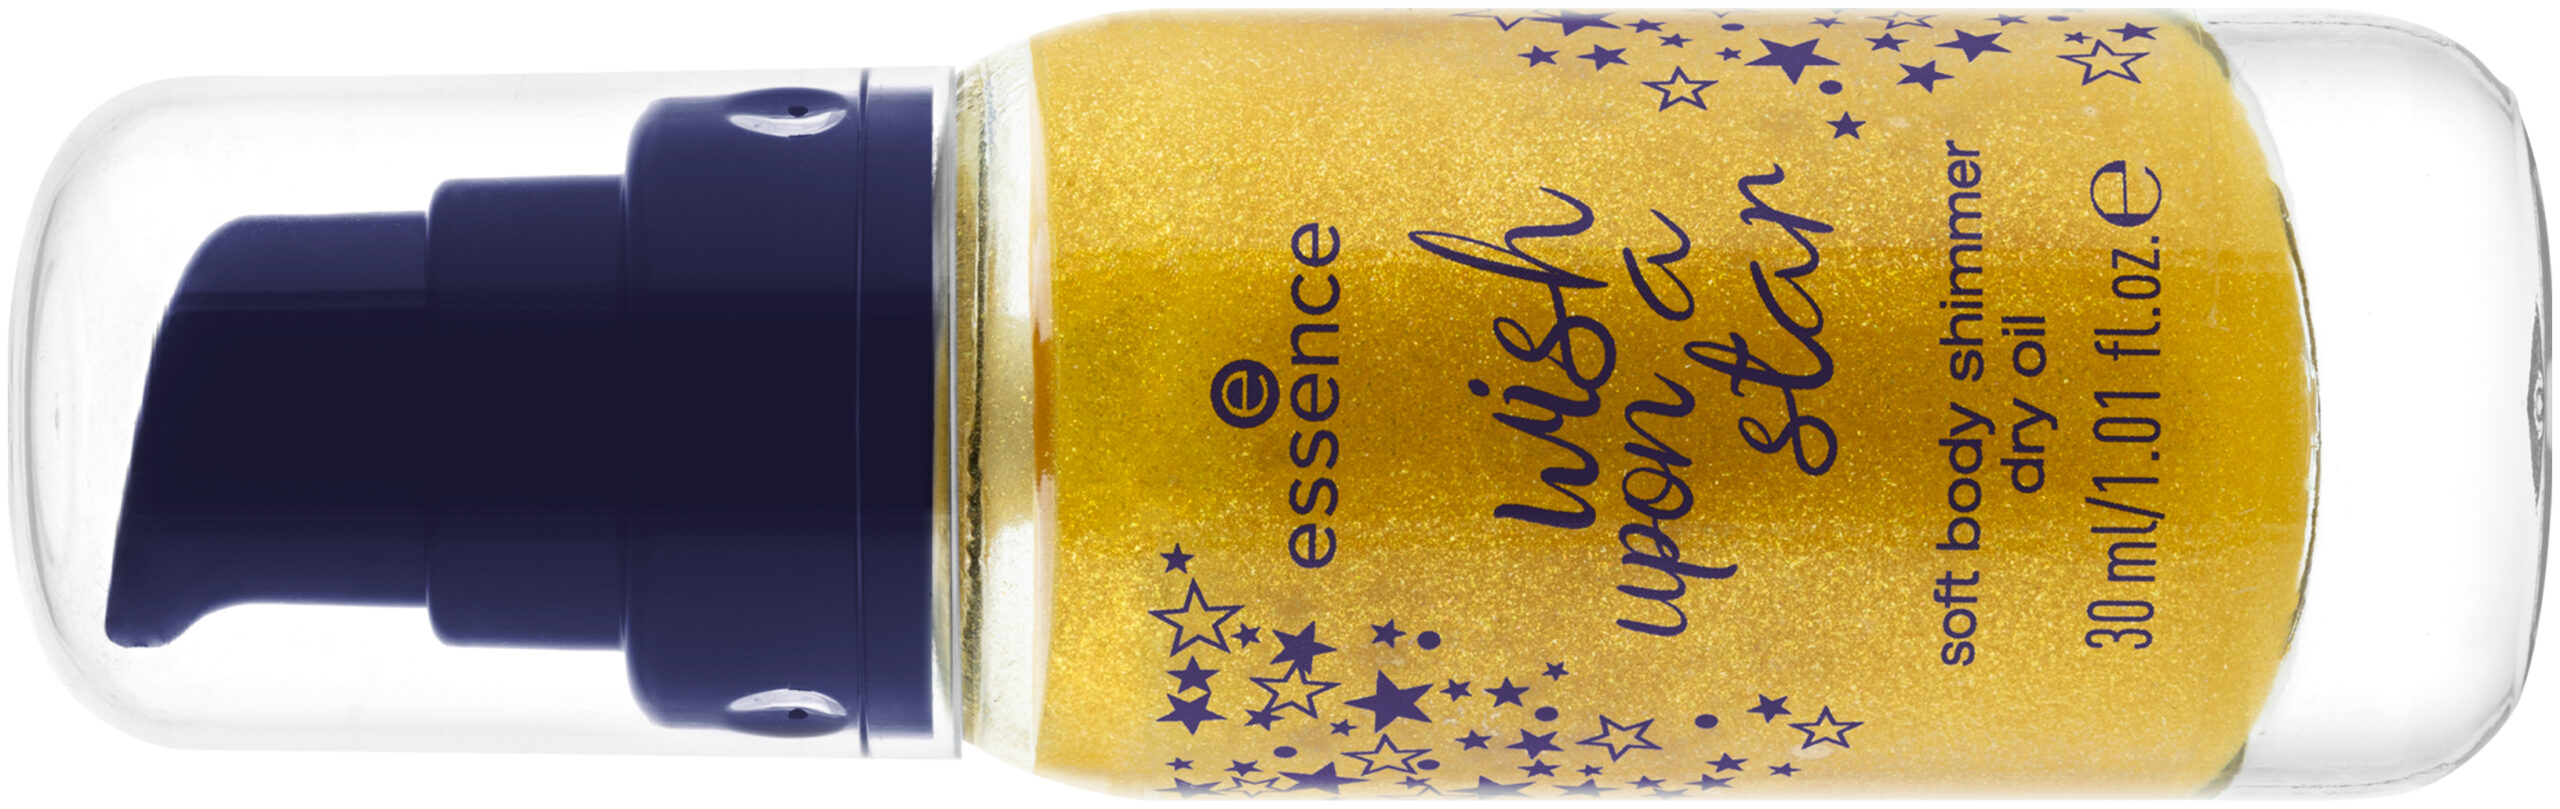 essence WISH UPON A STAR trend edition